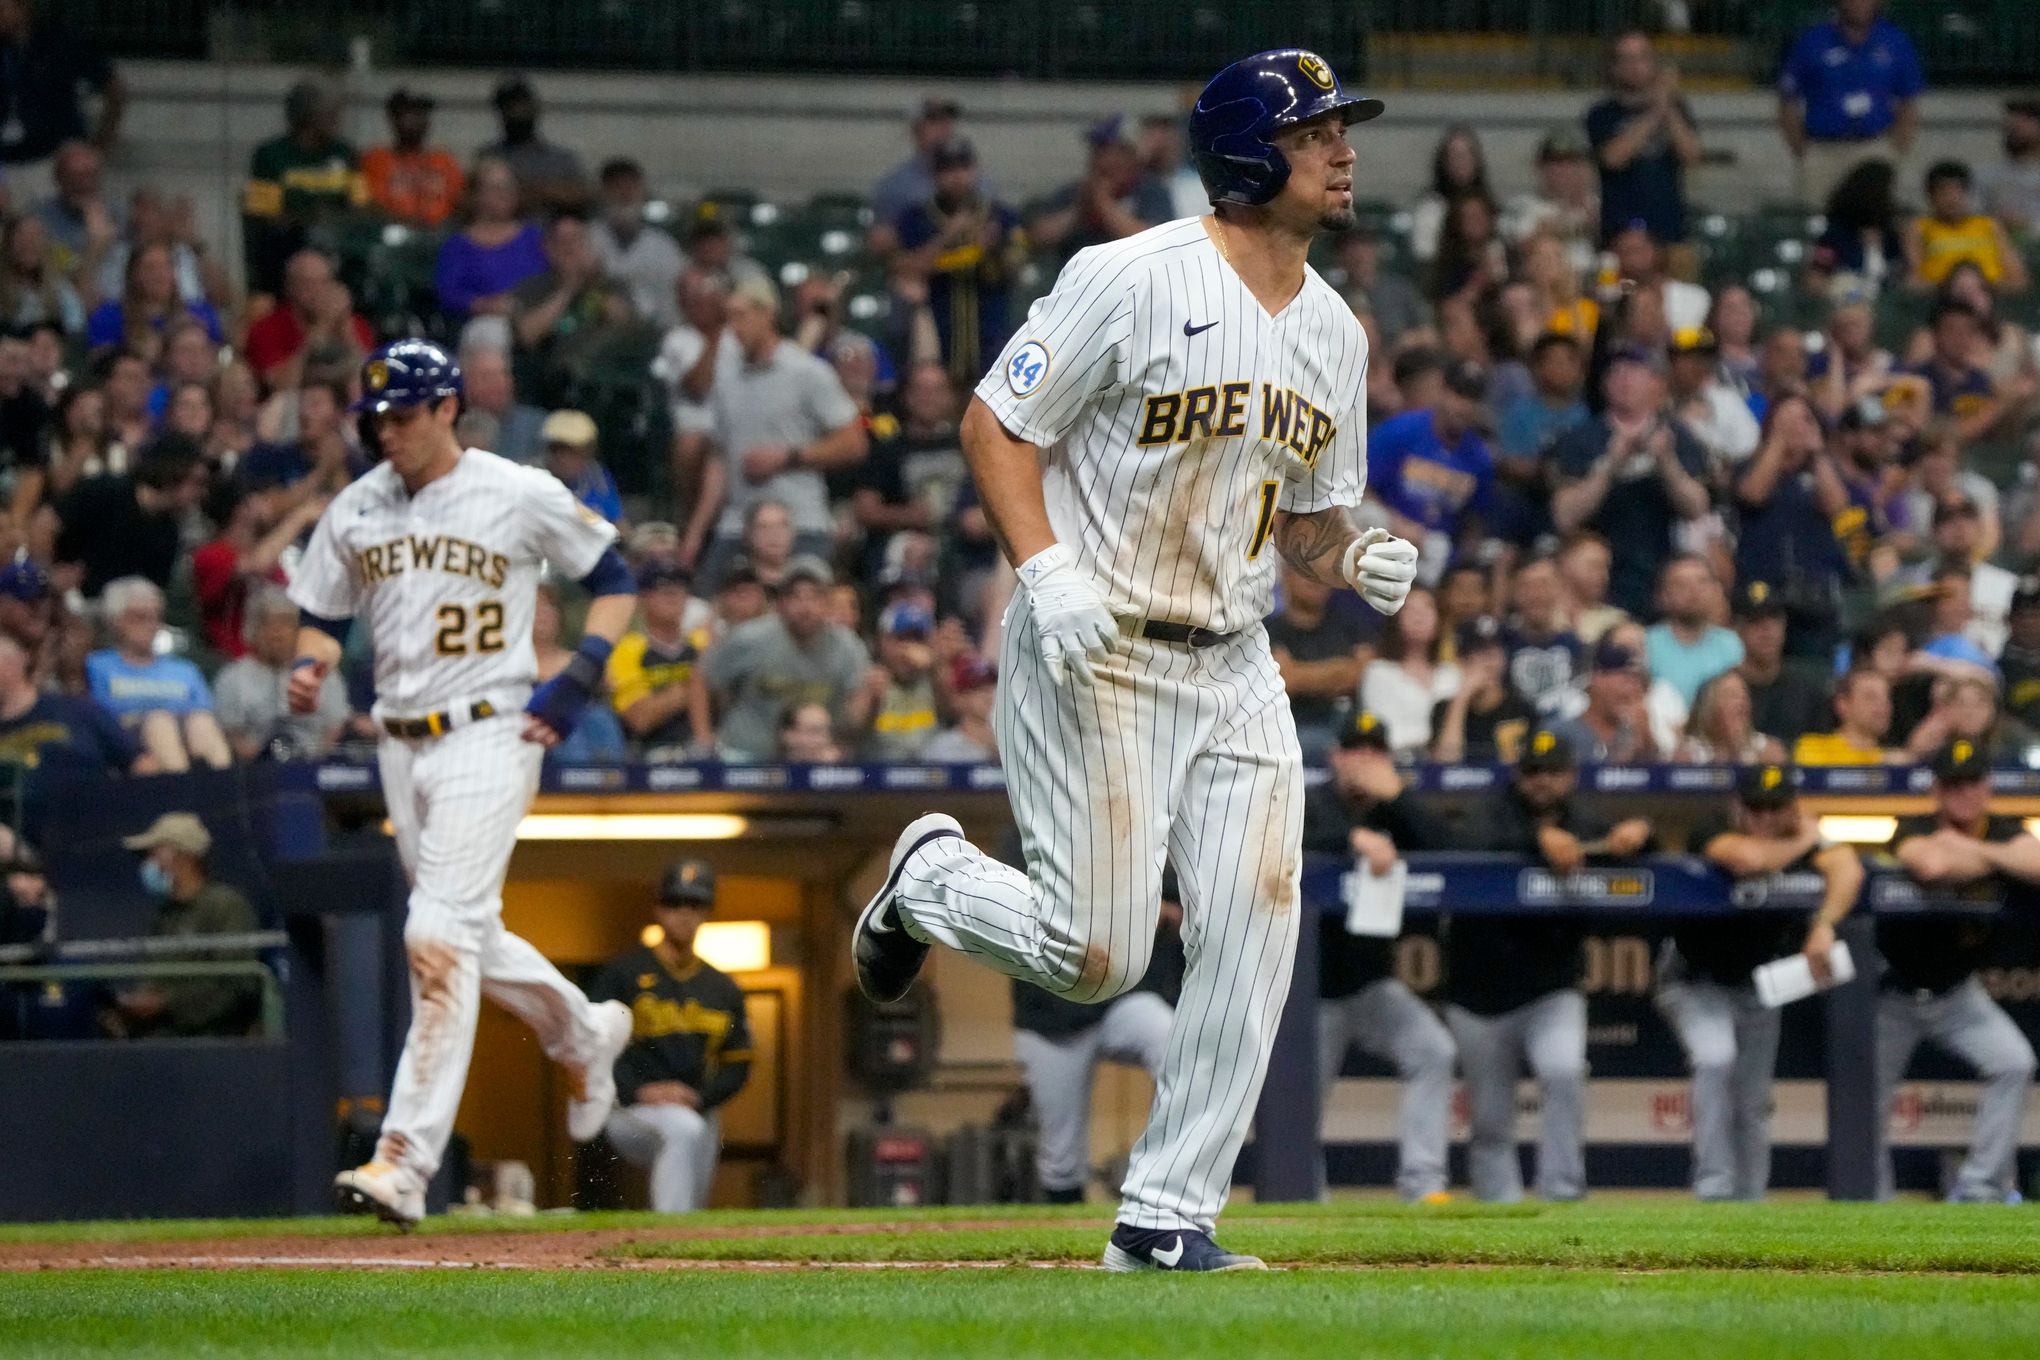 Corbin Burnes ties MLB strikeout record in Brewers win over Cubs